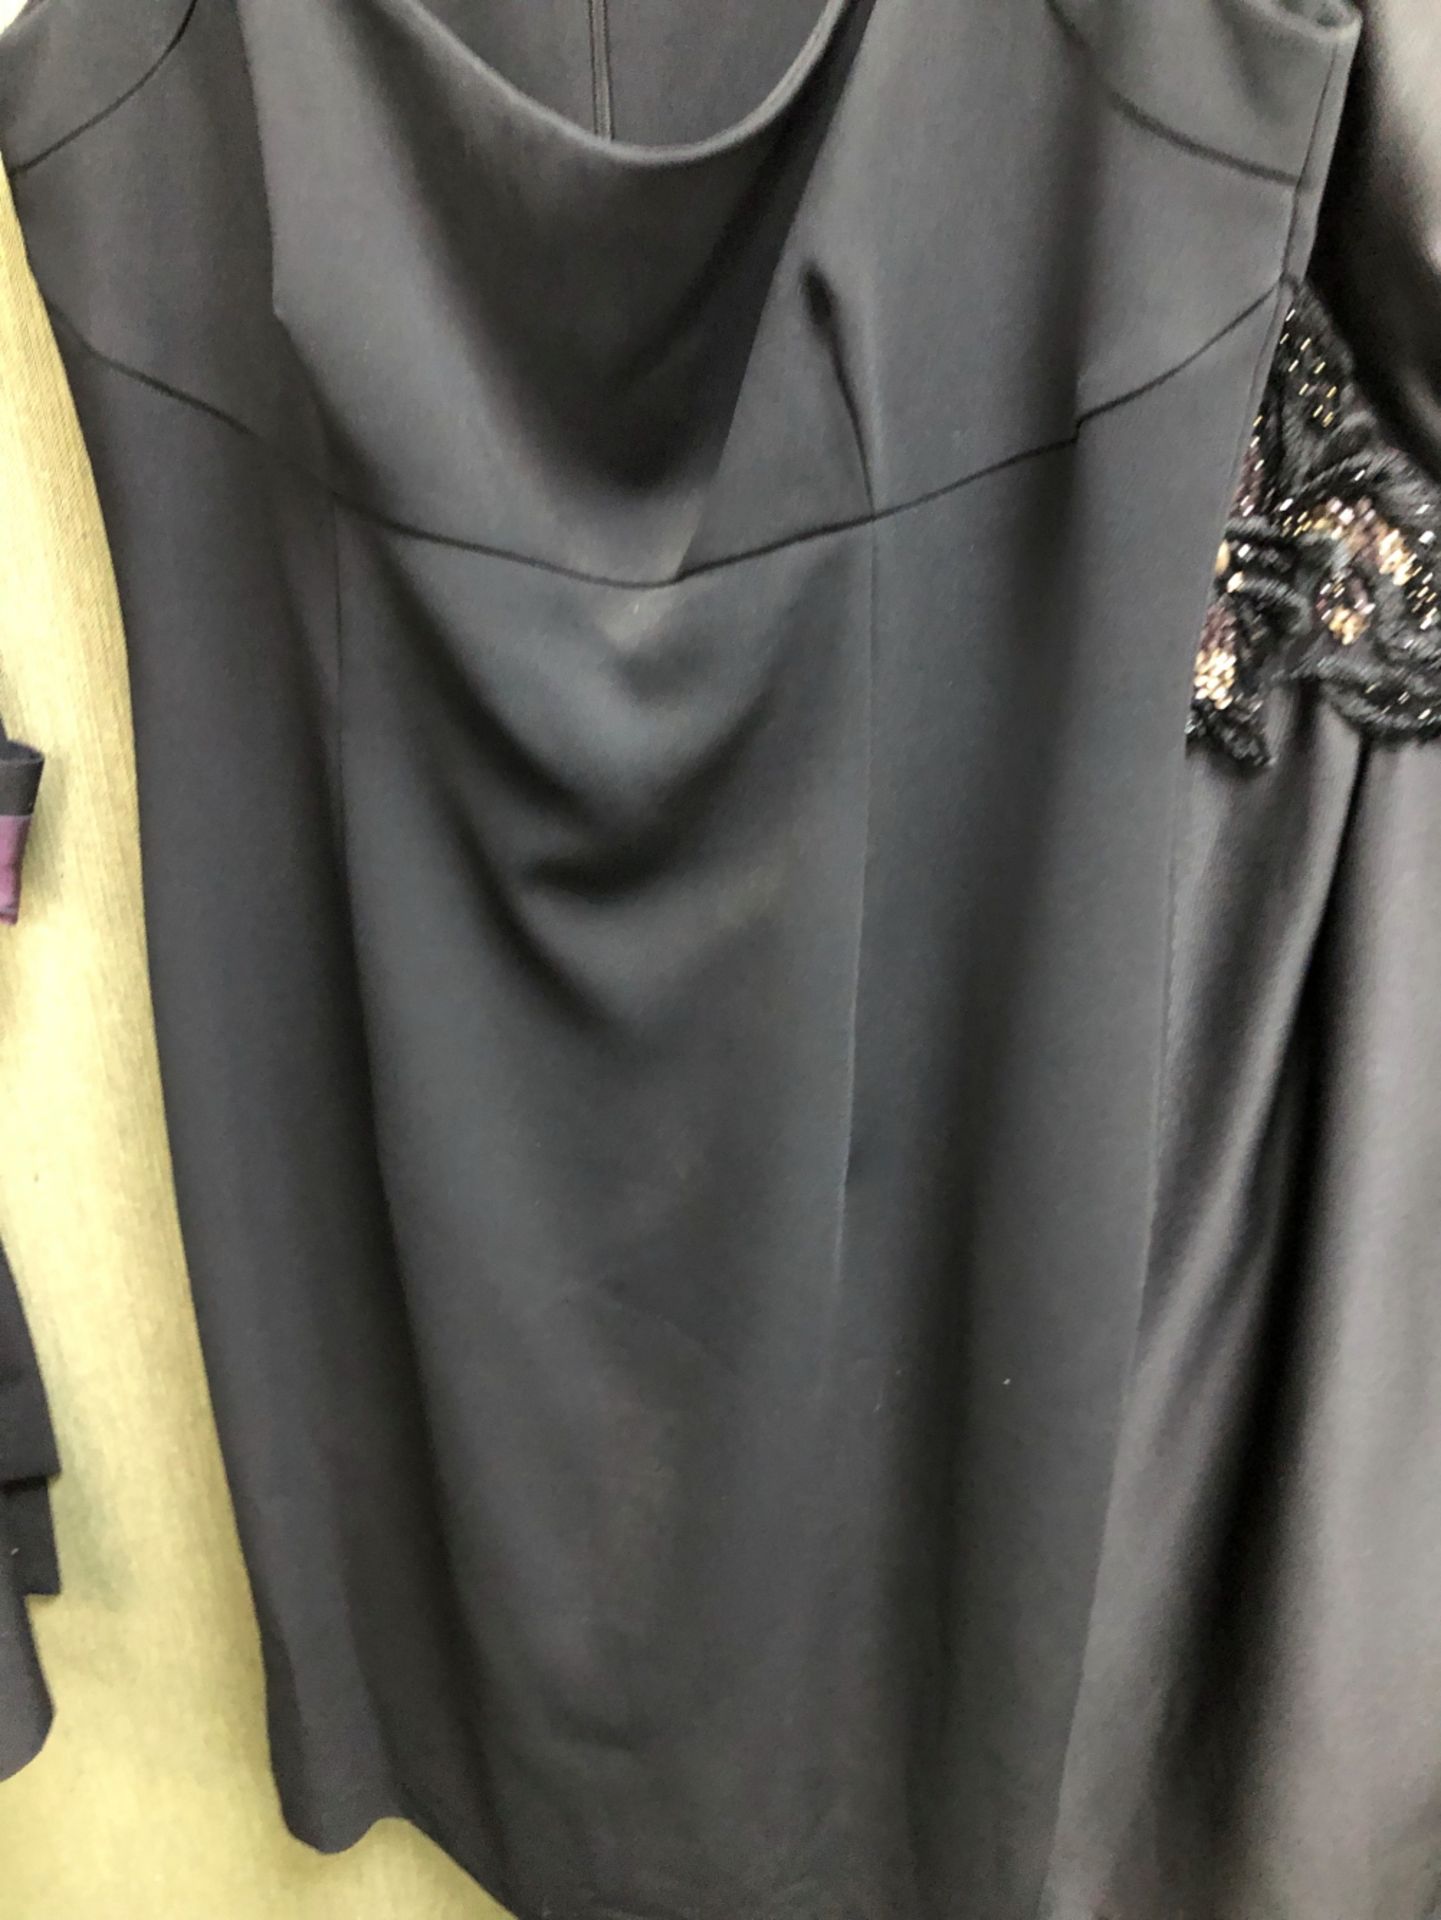 DRESS. A H... LONG BLACK COAT SIZE 14, TOGETHER WITH A JOHN CHARLES BLACK DRESS WITH SEQUIN DETAIL - Image 7 of 10